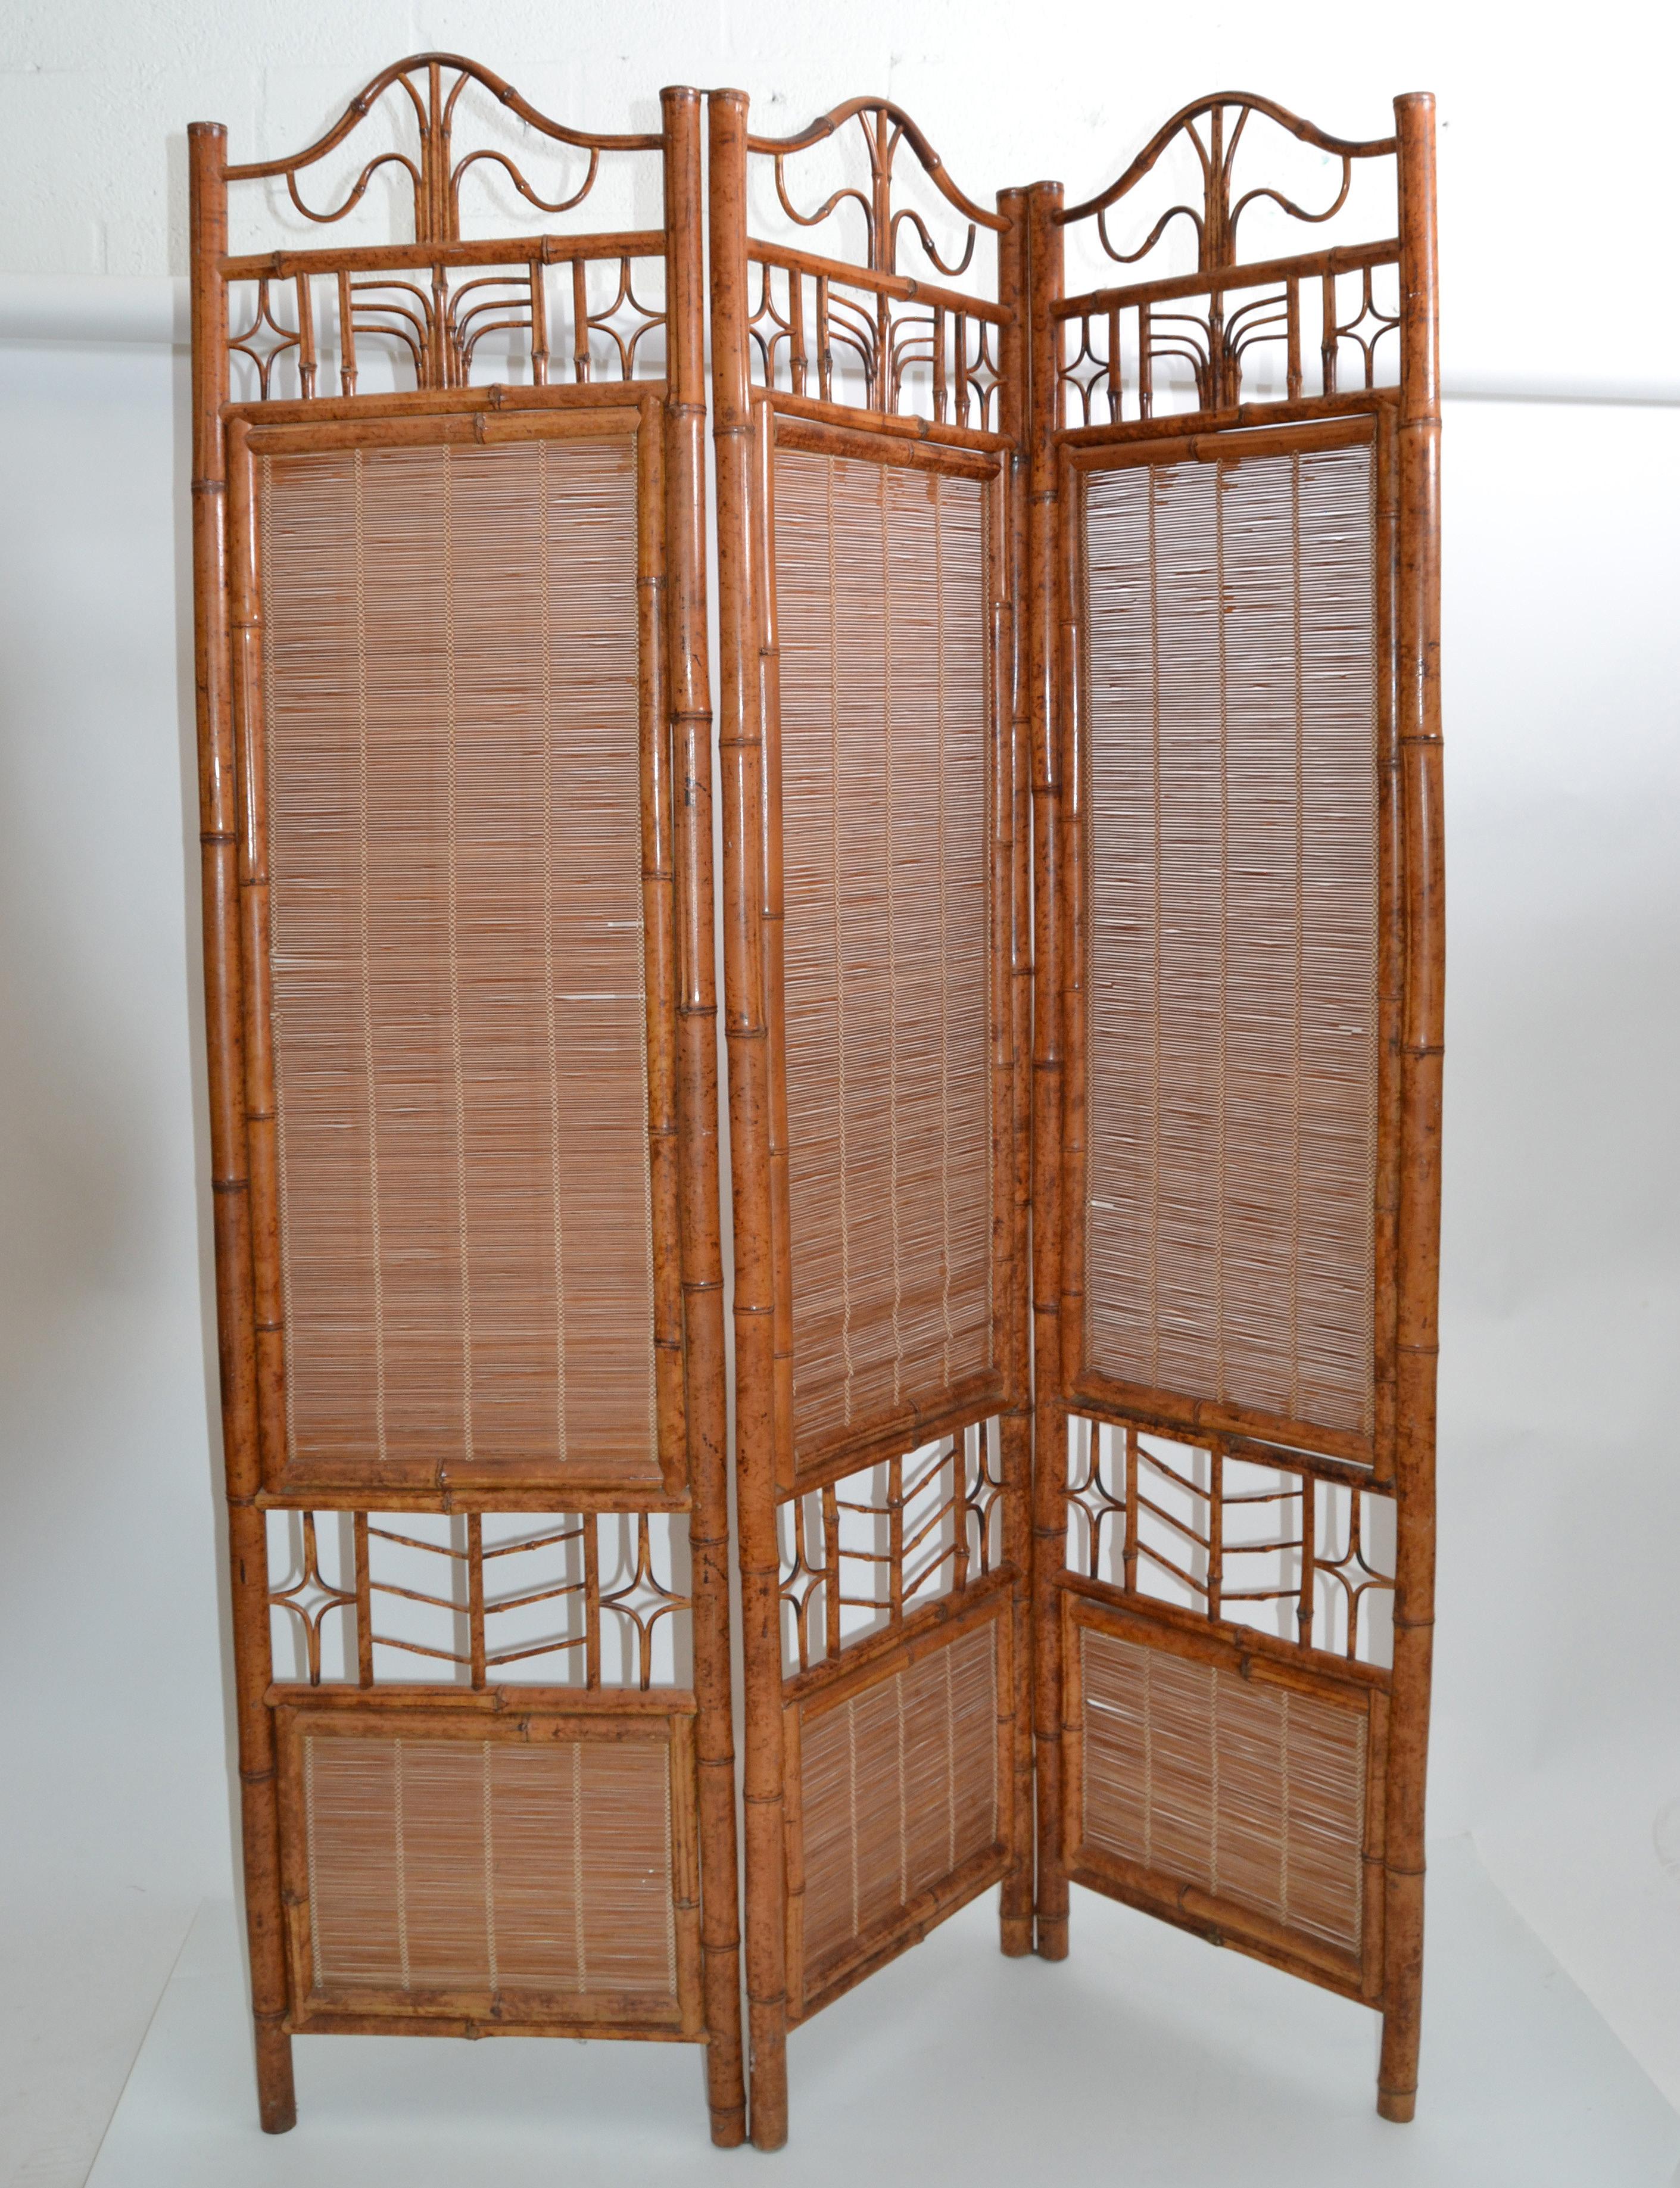 One Mid-Century Modern tall three wall-panel solid bamboo wood room divider, screen or partition in brown finish.
Boho chic very well crafted with wicker cross bindings and butterfly hinges.
Dimensions closed:
Width 18 inches, depth 6 inches, height